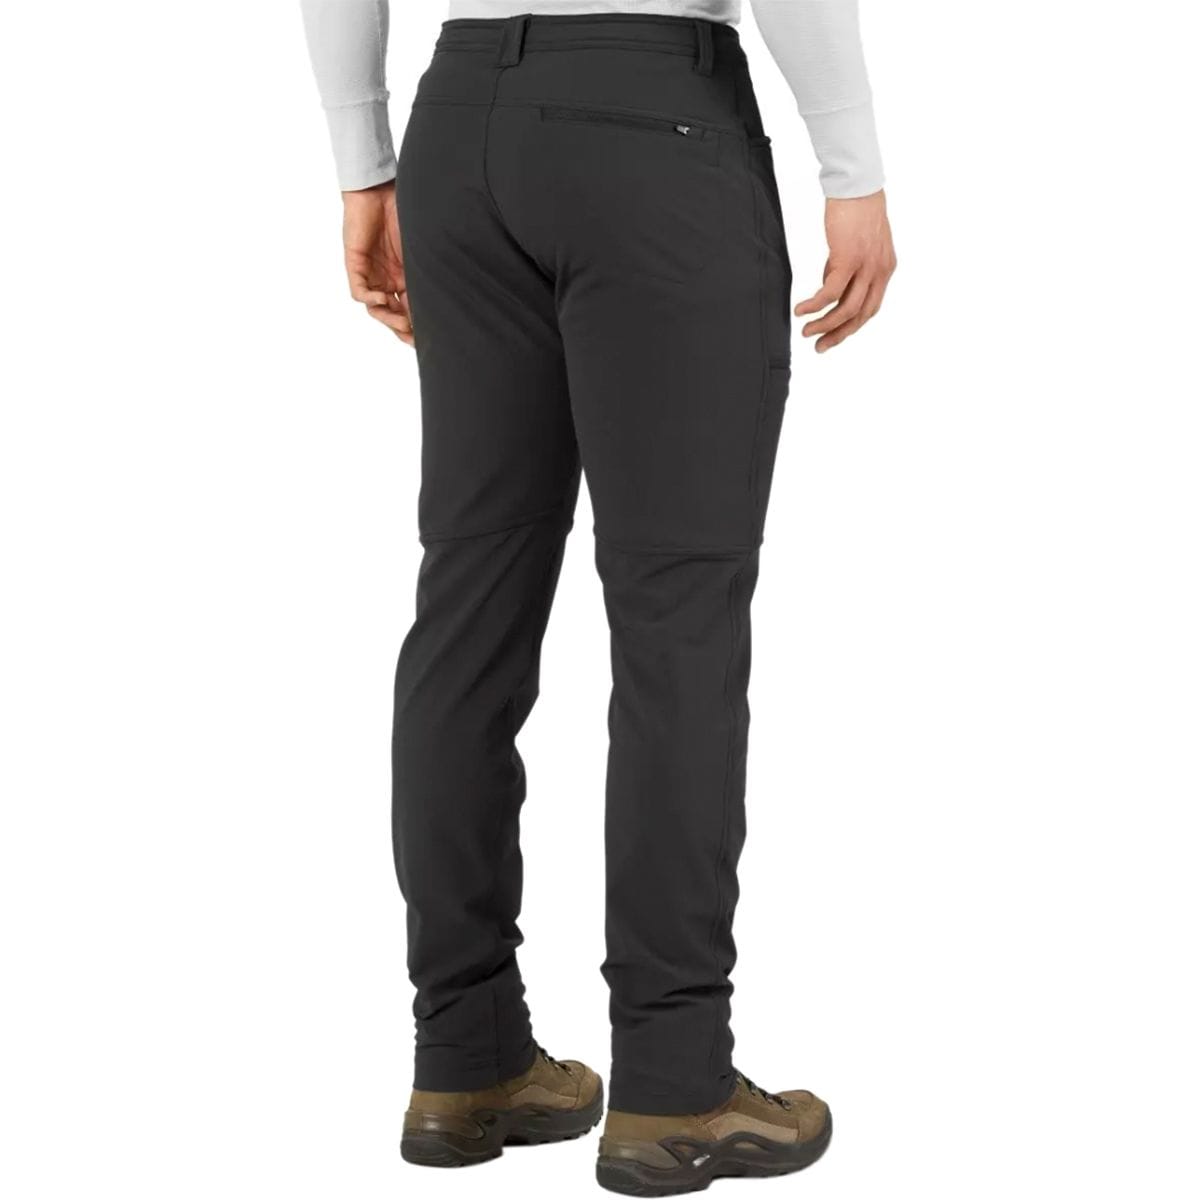 Outdoor Research Methow Pants - Men's - Clothing